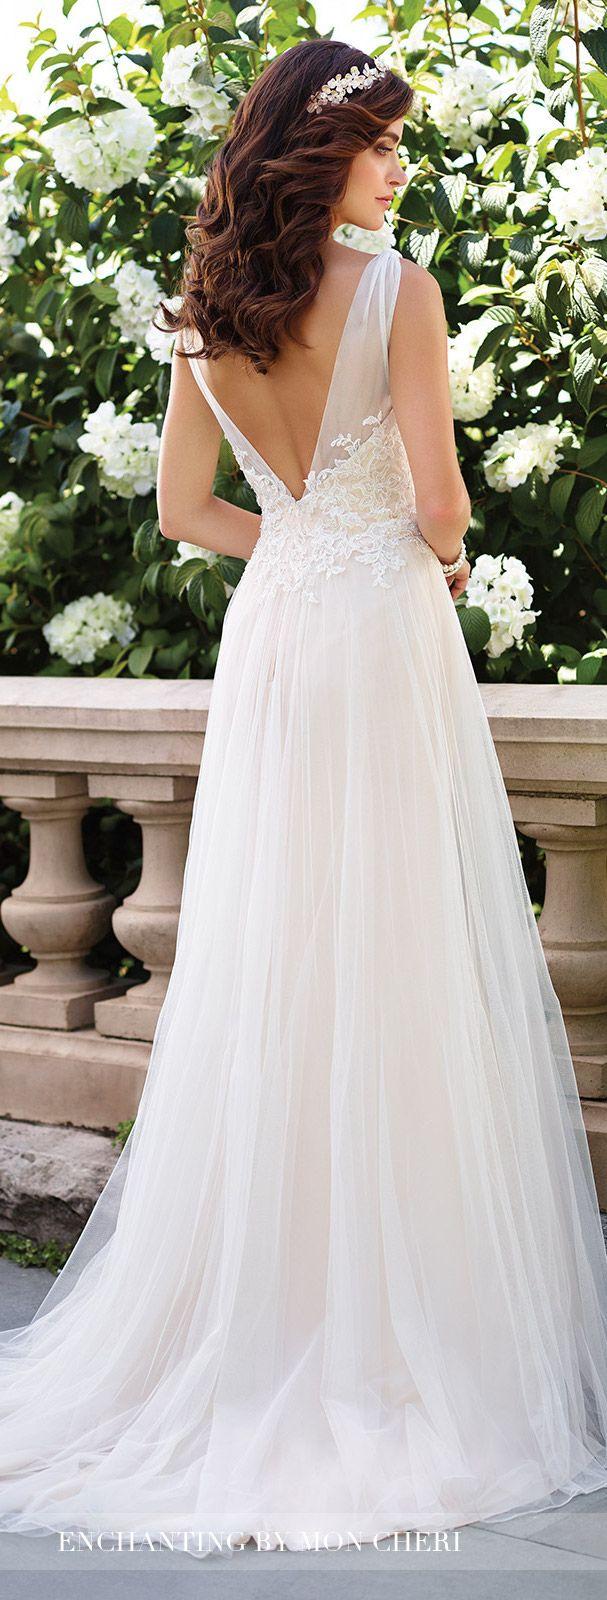 Hochzeit - Tulle And Lace A-Line Wedding Dress- 117176- Enchanting By Mon Cheri